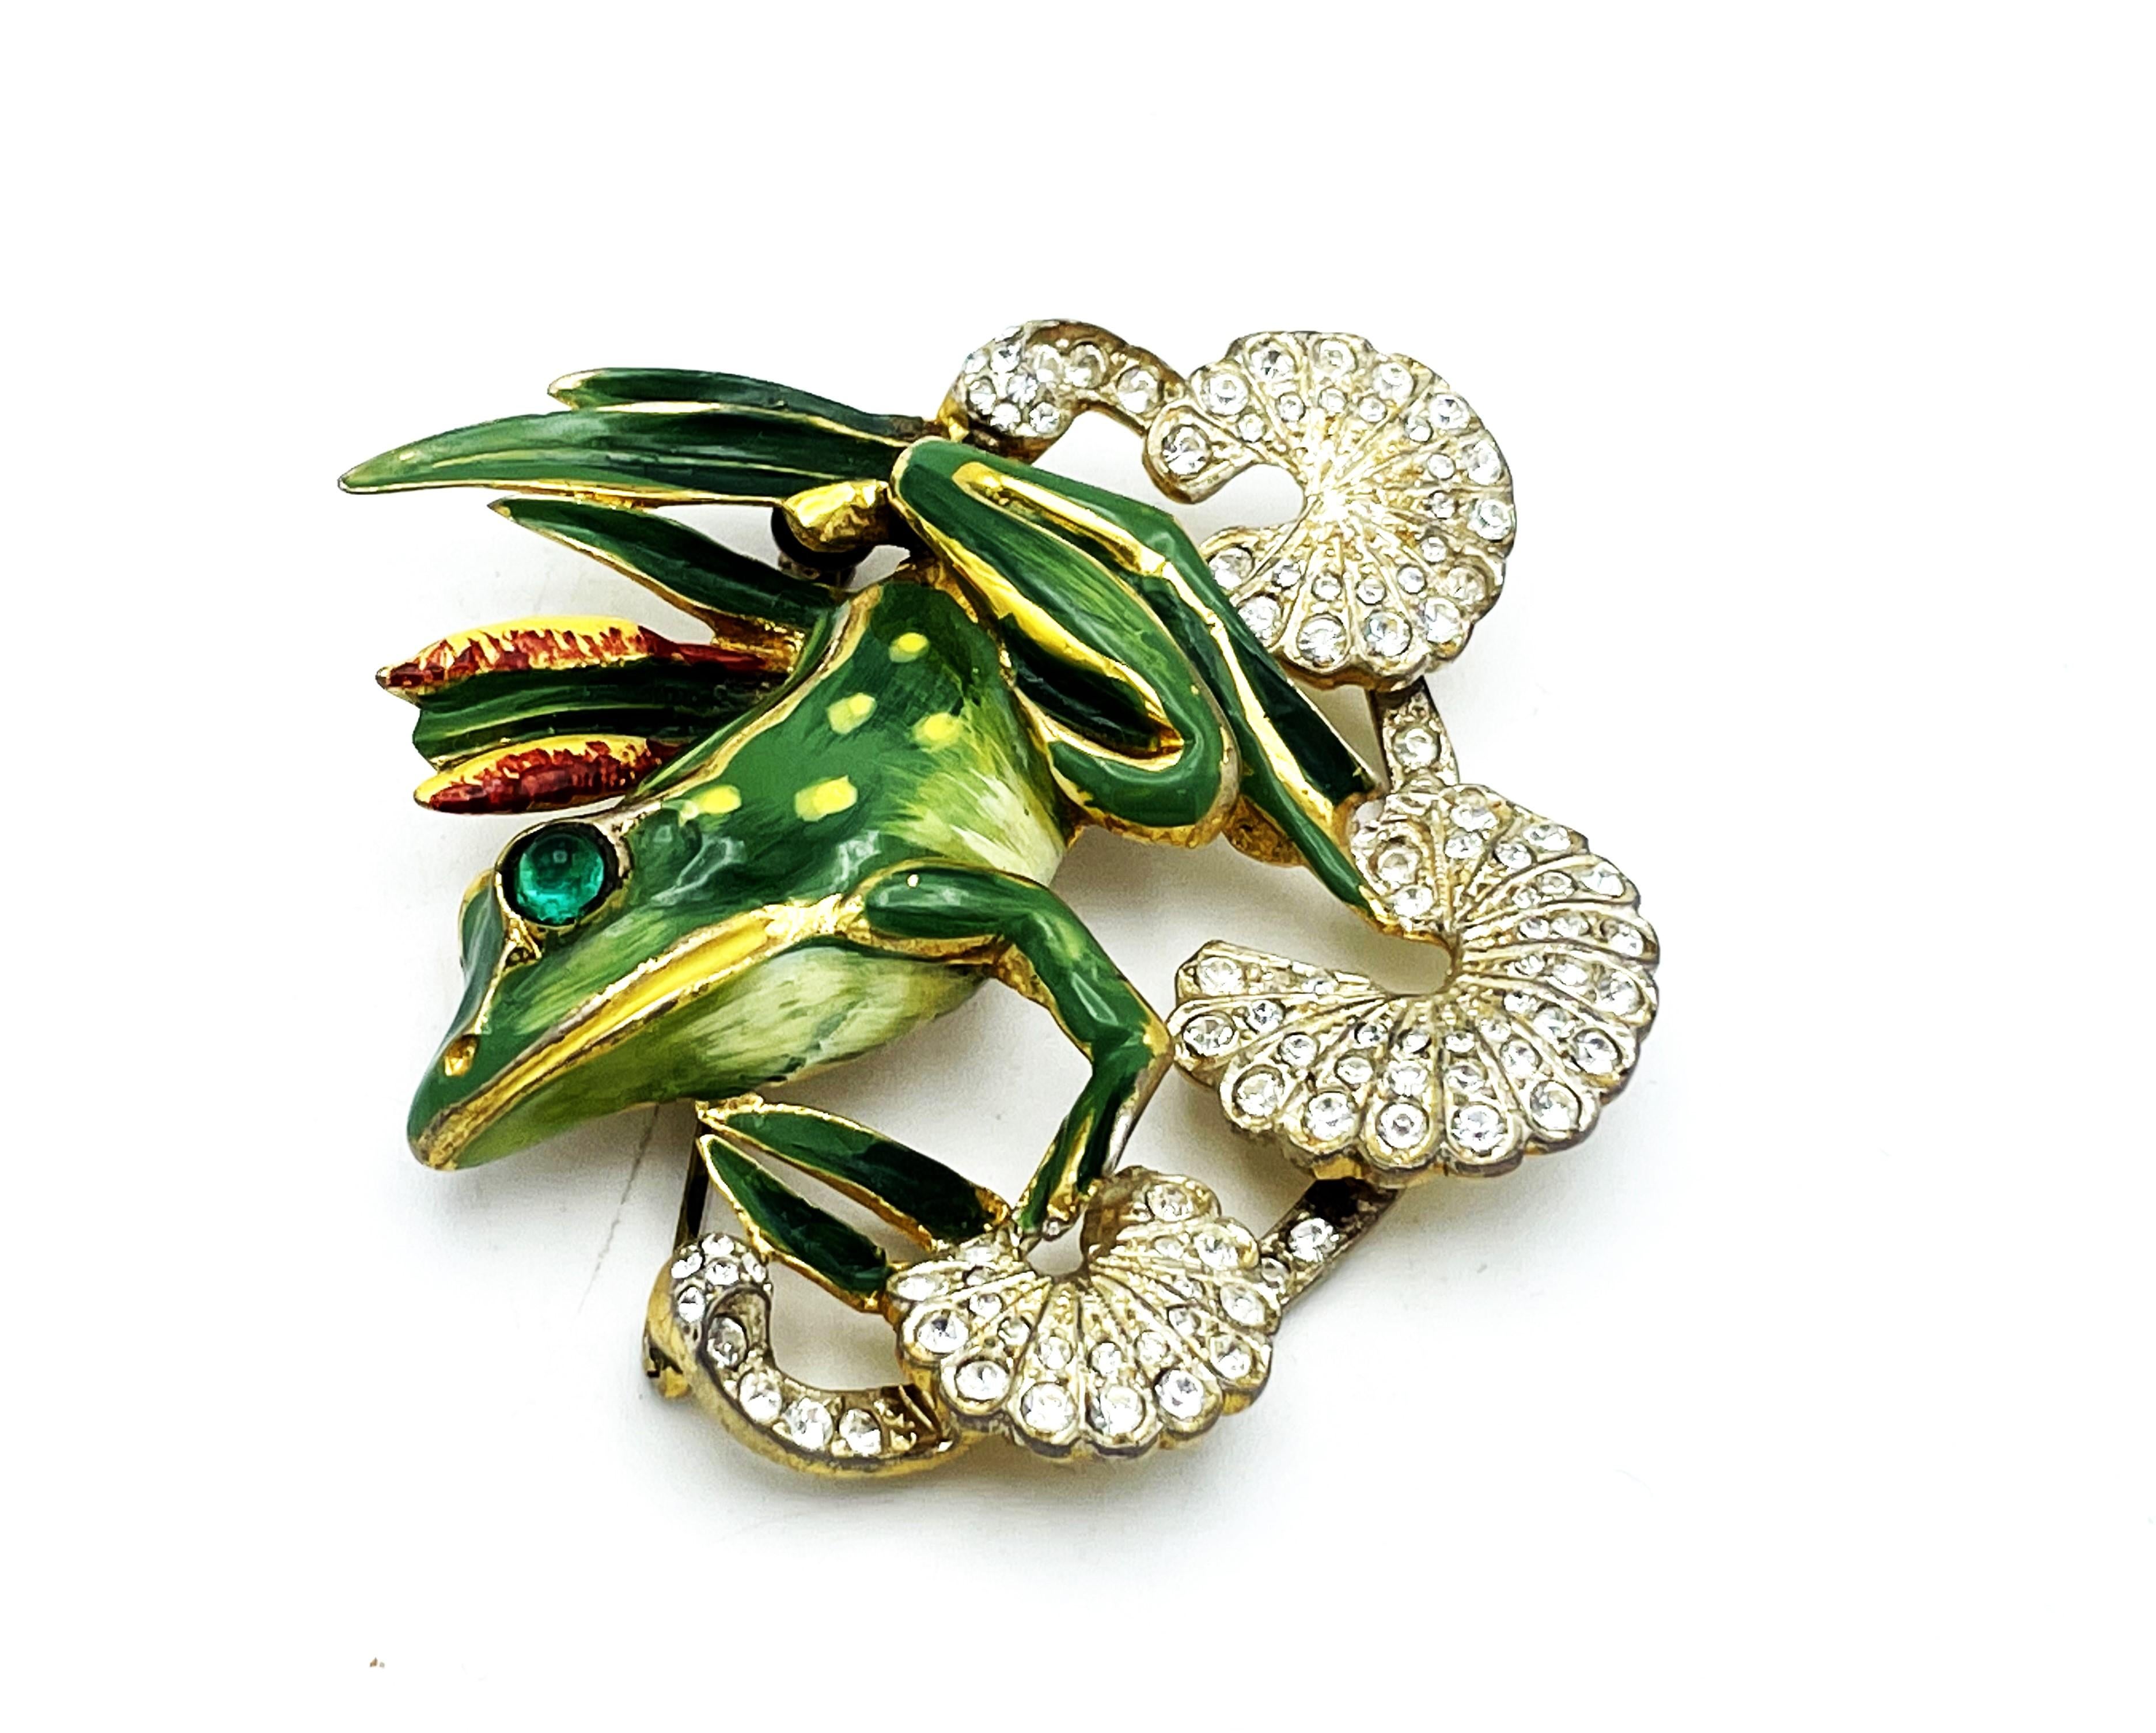 Brooch CORO CRAFT STERLING GOLD PAVE AND ENAMEL FROG ON THREE LILIY PADS SITTING

Measurement:  Width 6 cm x Height 5,5 cm 
Features:
- Such a great frog brooch sitting on three Lilys.
- Signed on the back with 'CORO CRAFT STERLING'
- Date 1940/42